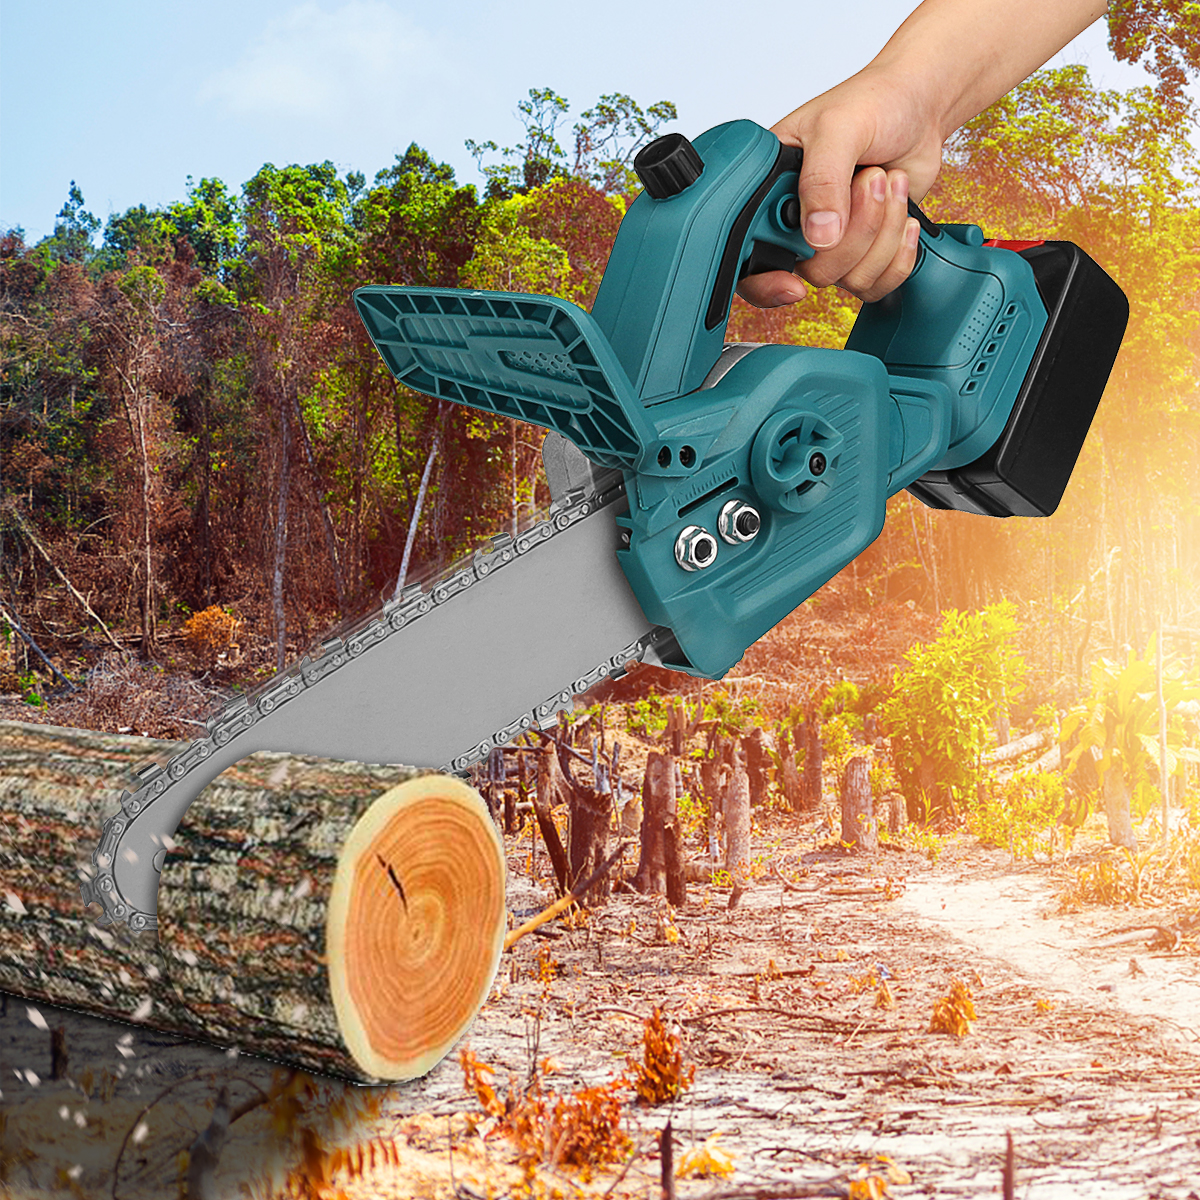 288VF-300W-10In-One-hand-Electric-Rechargeable-Chain-Saw-Cordless-Chainsaw-Wood-Cutter-Woodworking-T-1896287-7